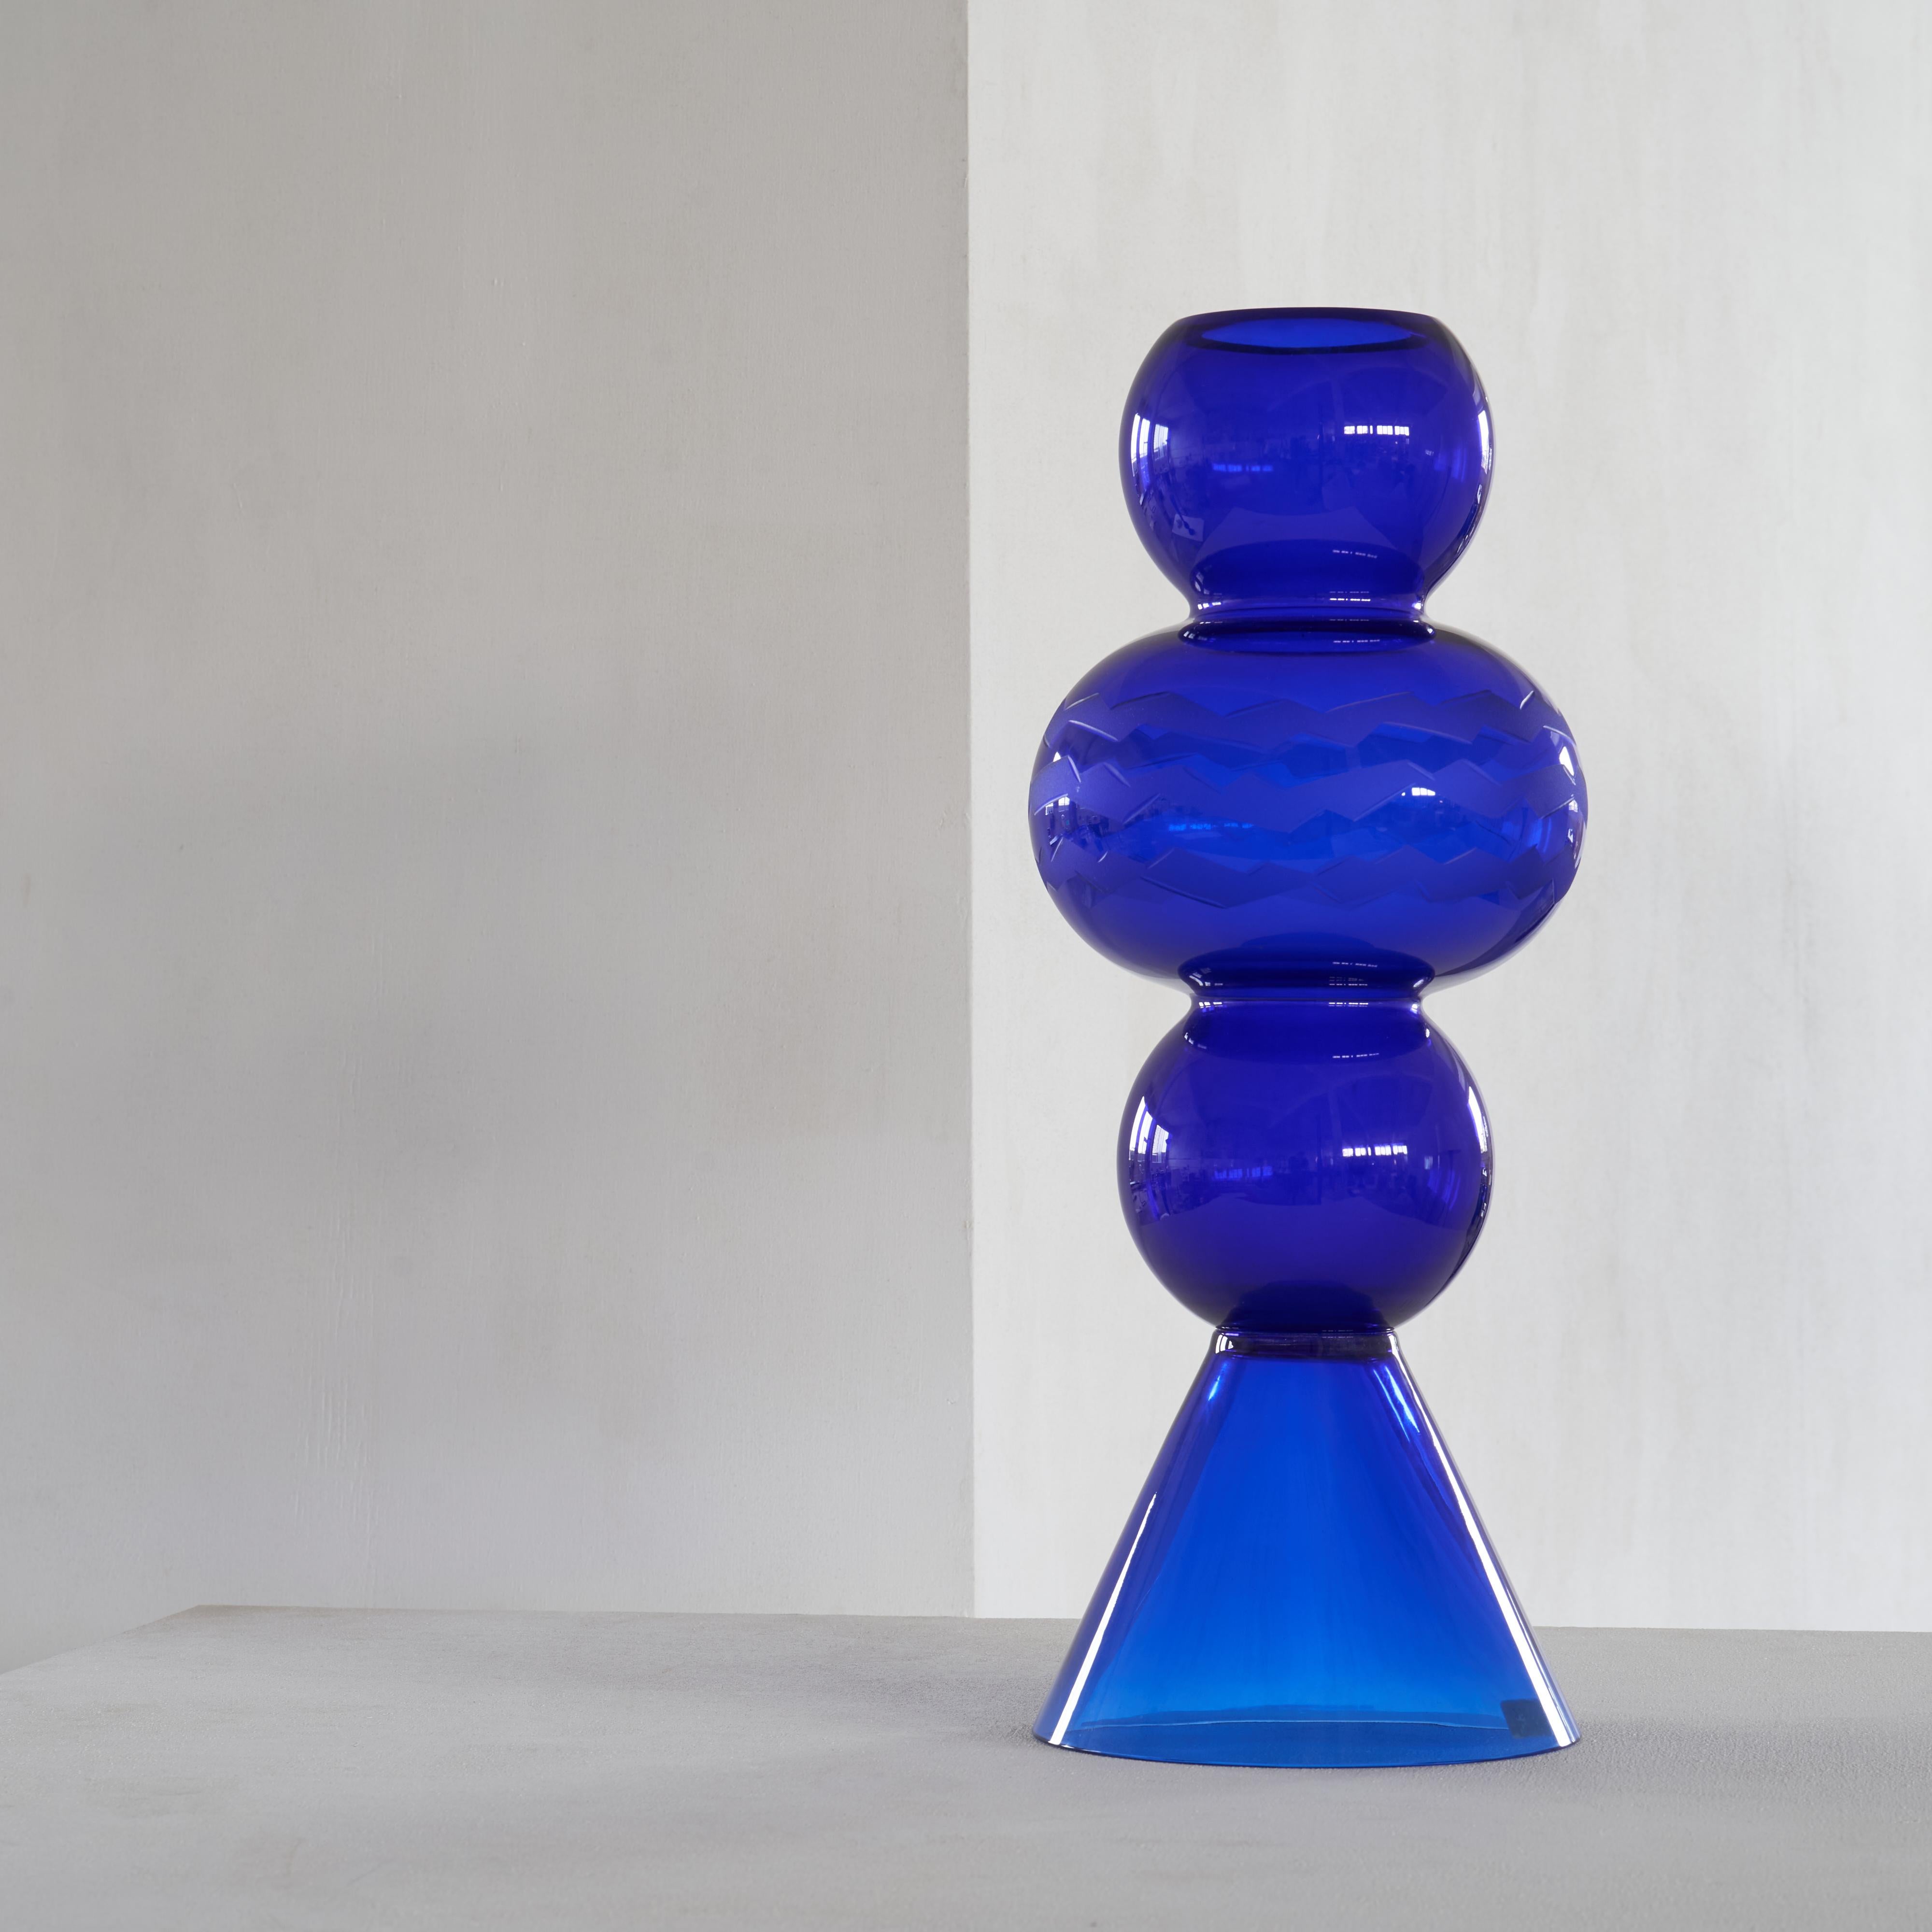 Extraordinary and unique blue glass object by famous designer and Memphis Group founding member Matteo Thun (1952 – Italy). Very, very rare. Rinascimento Collection for Tiffany & Co, made by Murano glass house Barovier&Toso in Venezia in 1987.